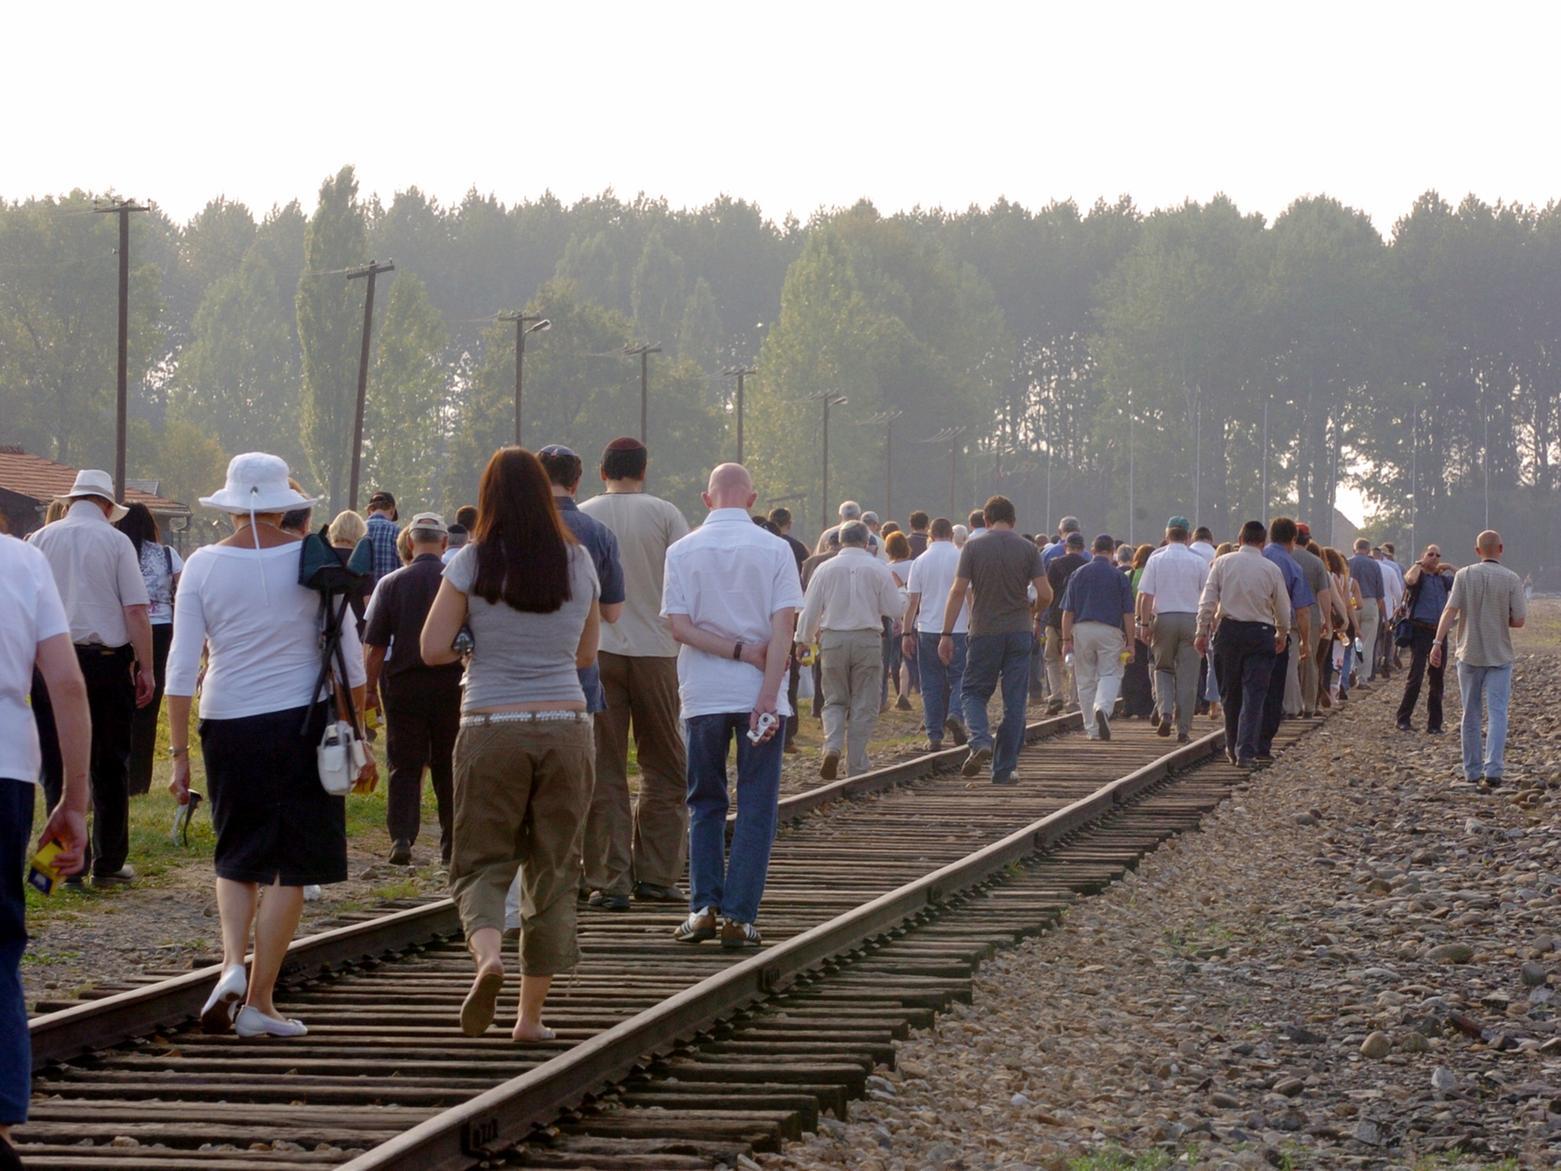 The group follow the railway line into Auschwitz-Birkenau following the same route as the prisoners-only this time by foot.